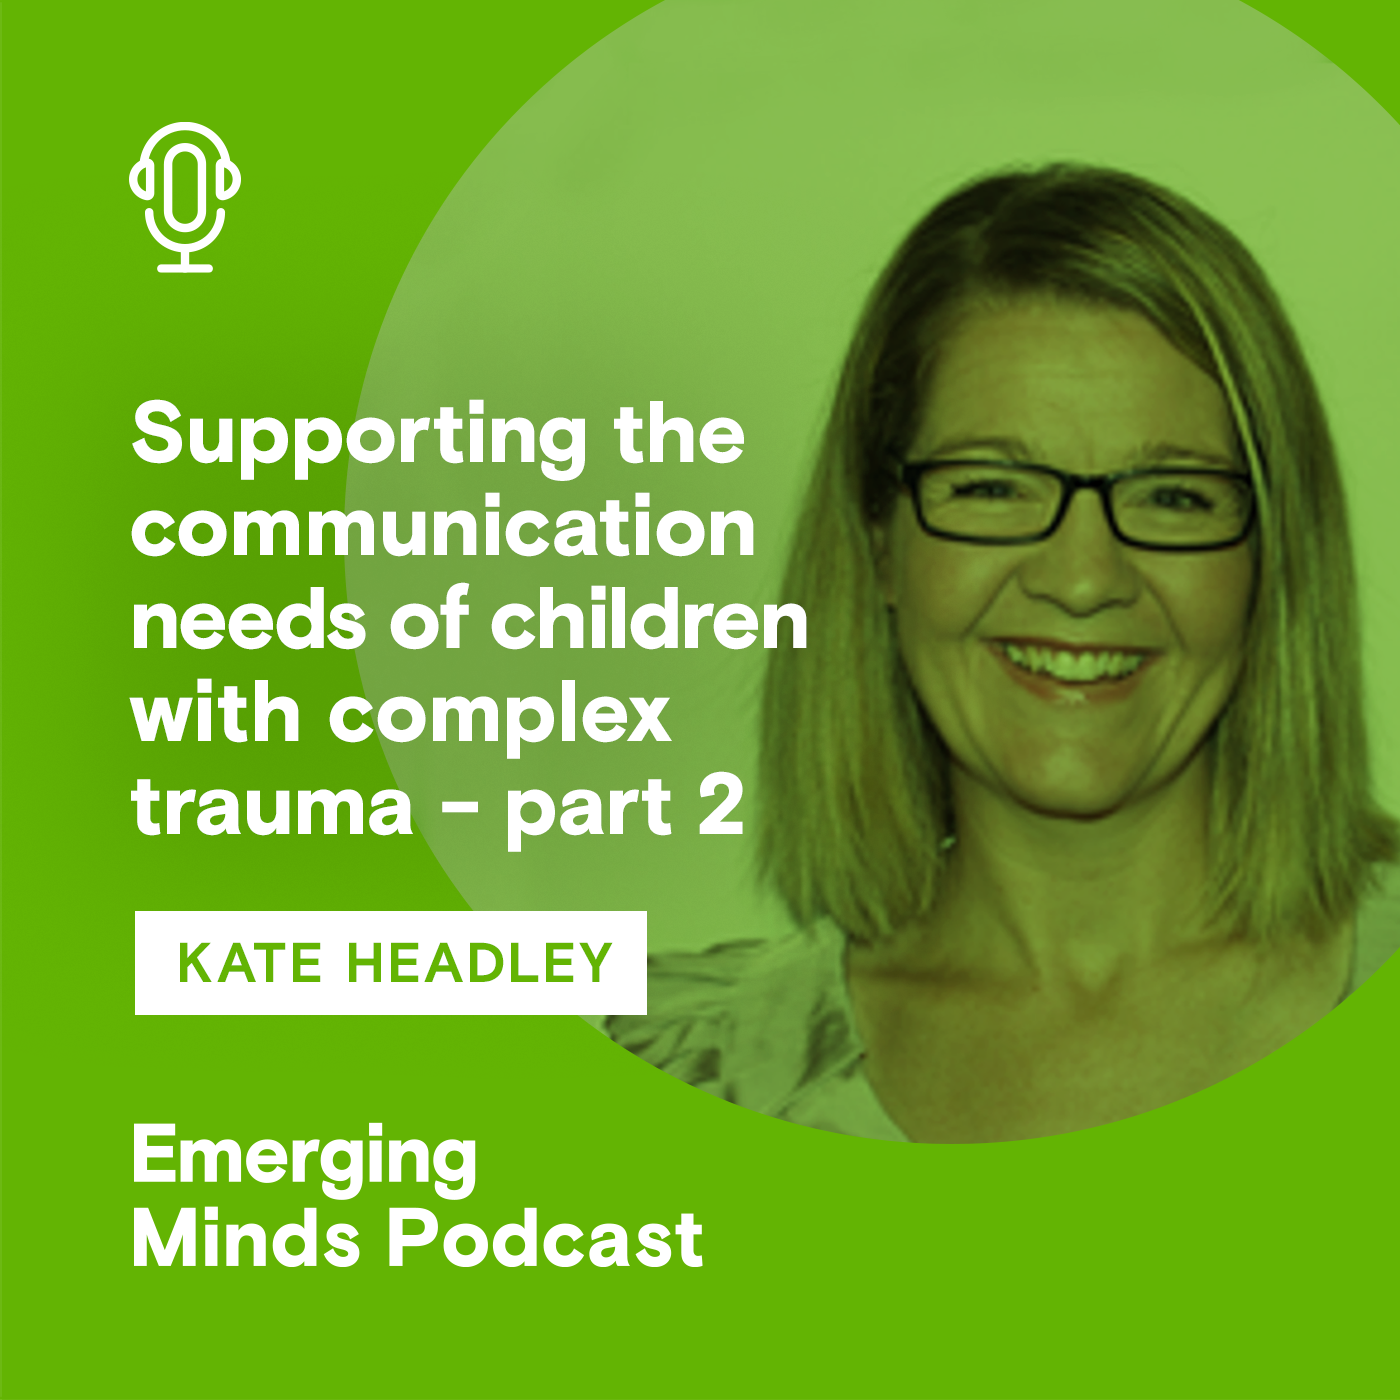 Supporting the communication needs of children with complex trauma - part two